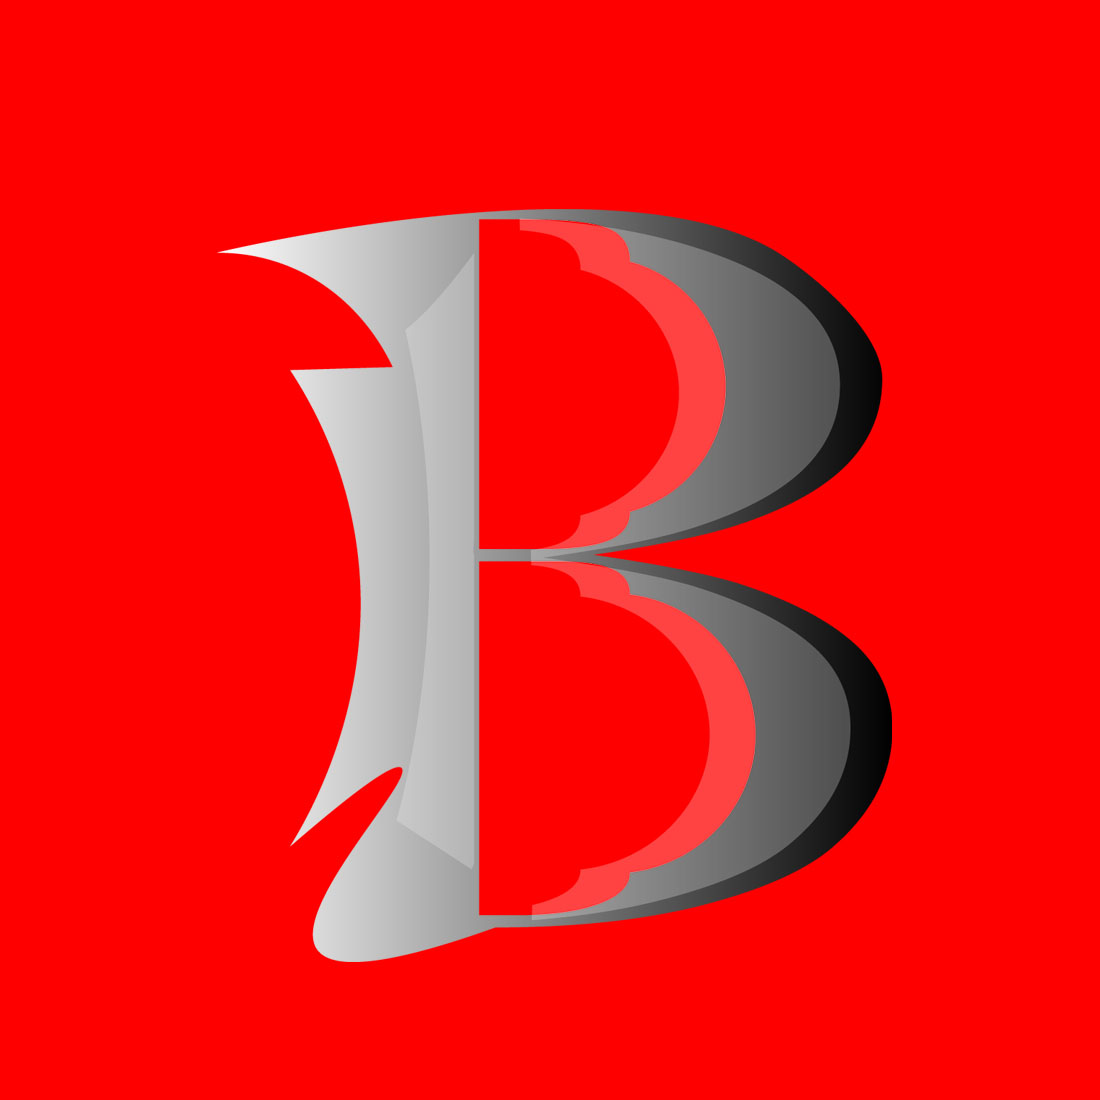 A distinctive and exclusive logo, the letter B preview image.